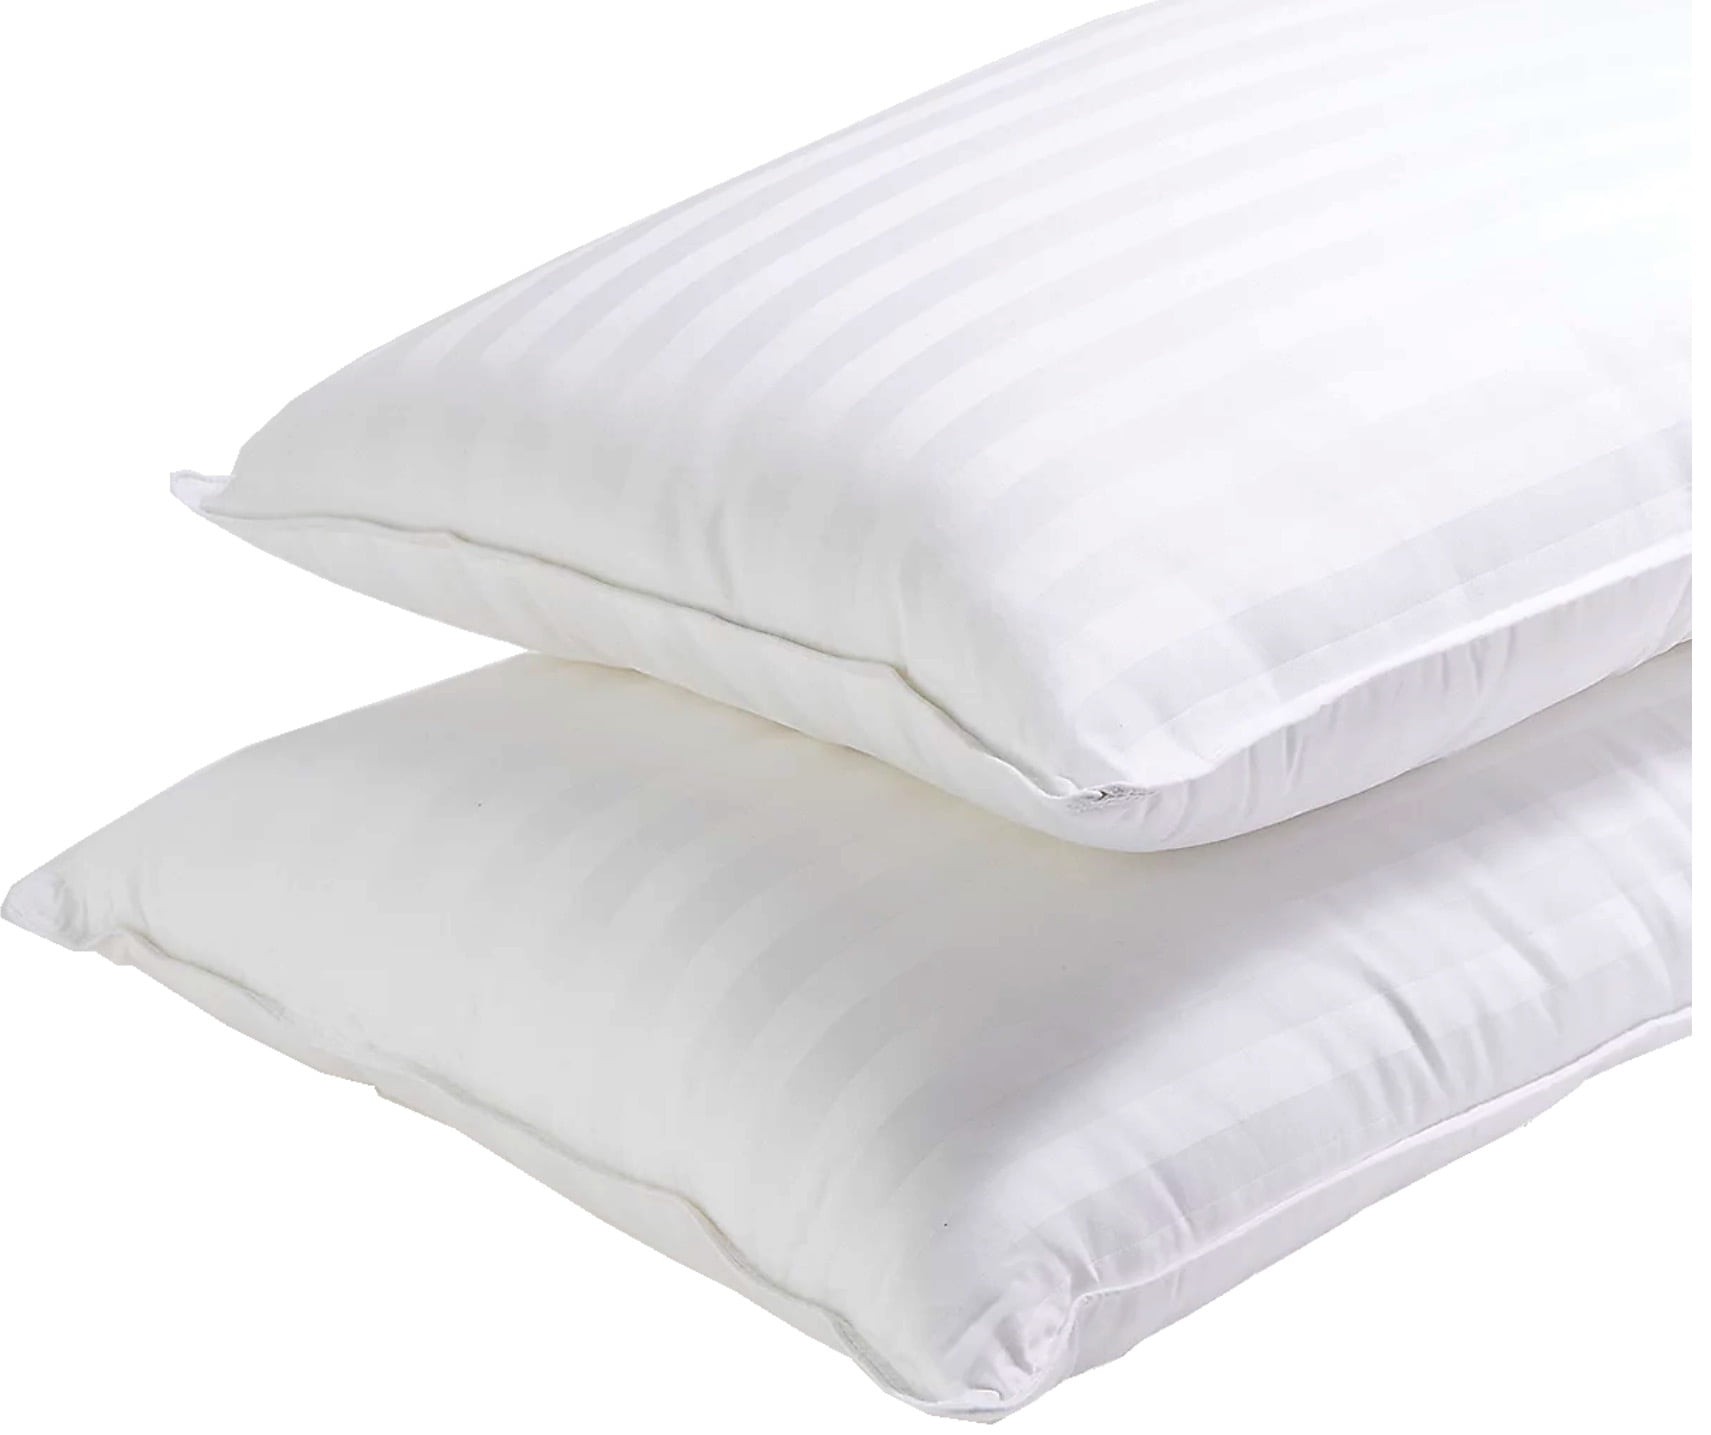 Casa Platino Bed Pillows 4 Pack, King Size, Soft, Luxury Pillow